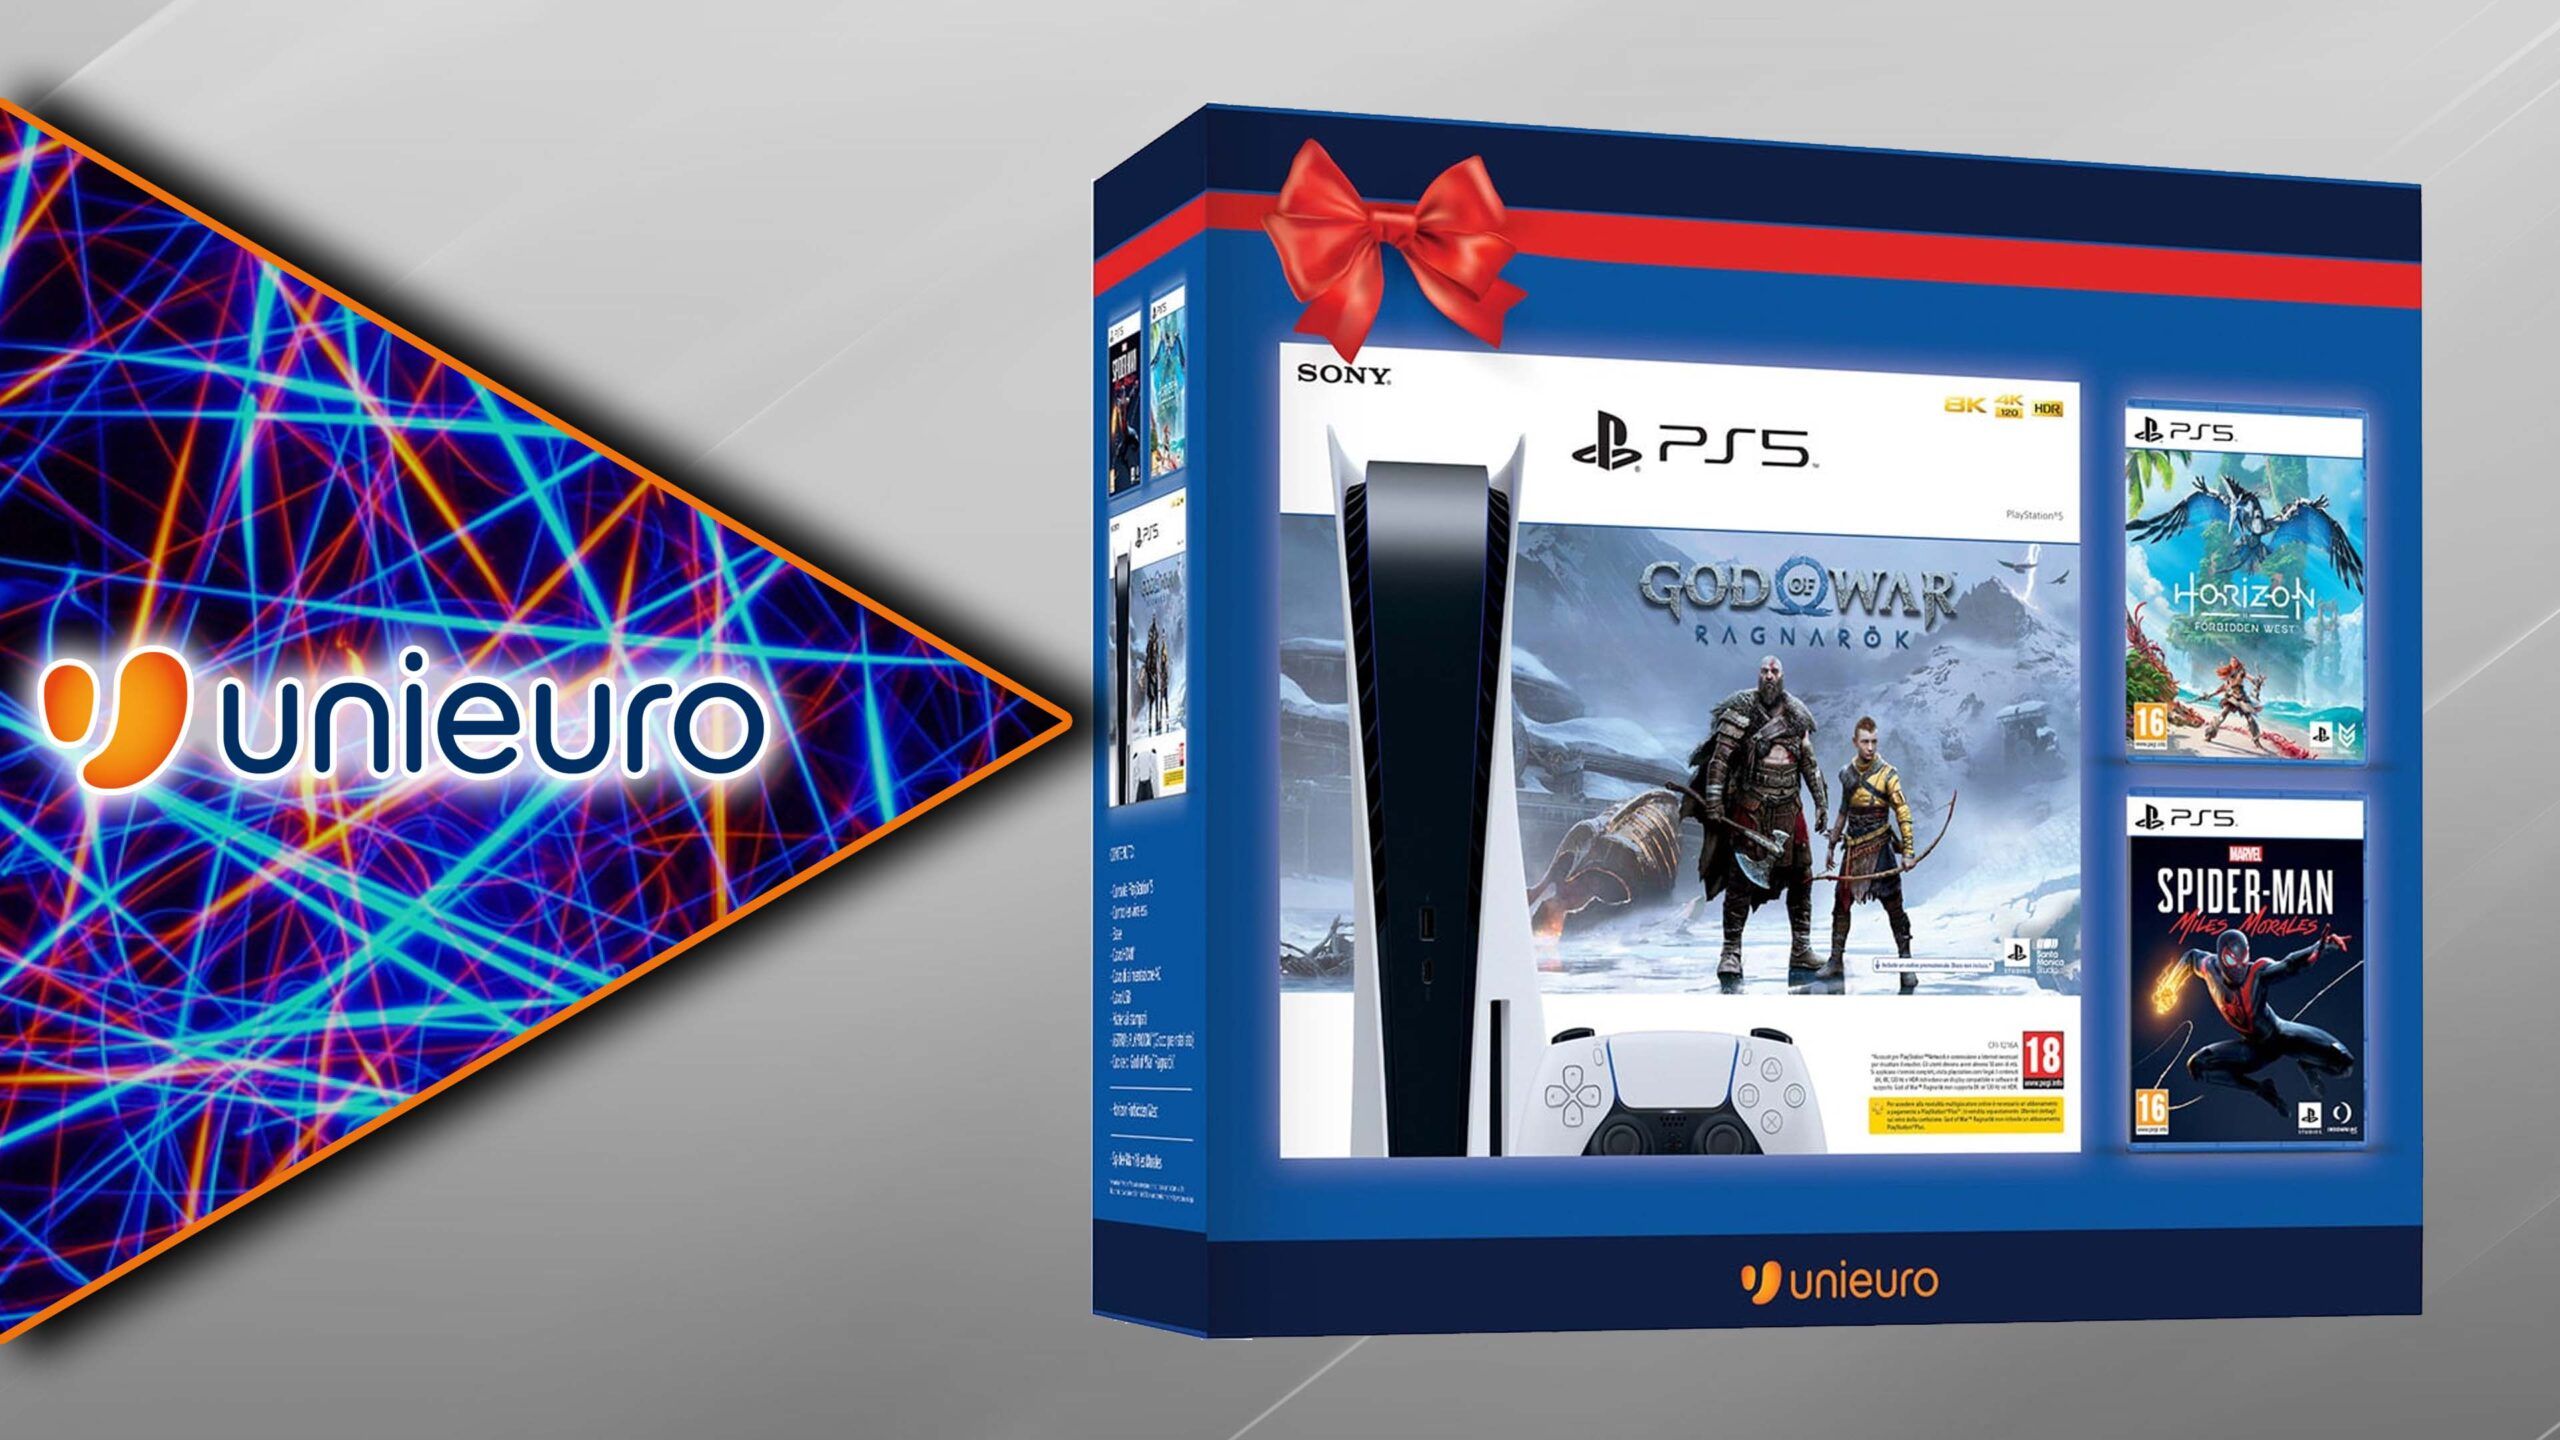 Bundle with God of War Ragnarok, Horizon Forbidden West and Spider-Man Miles Morales available at Unieuro Stores